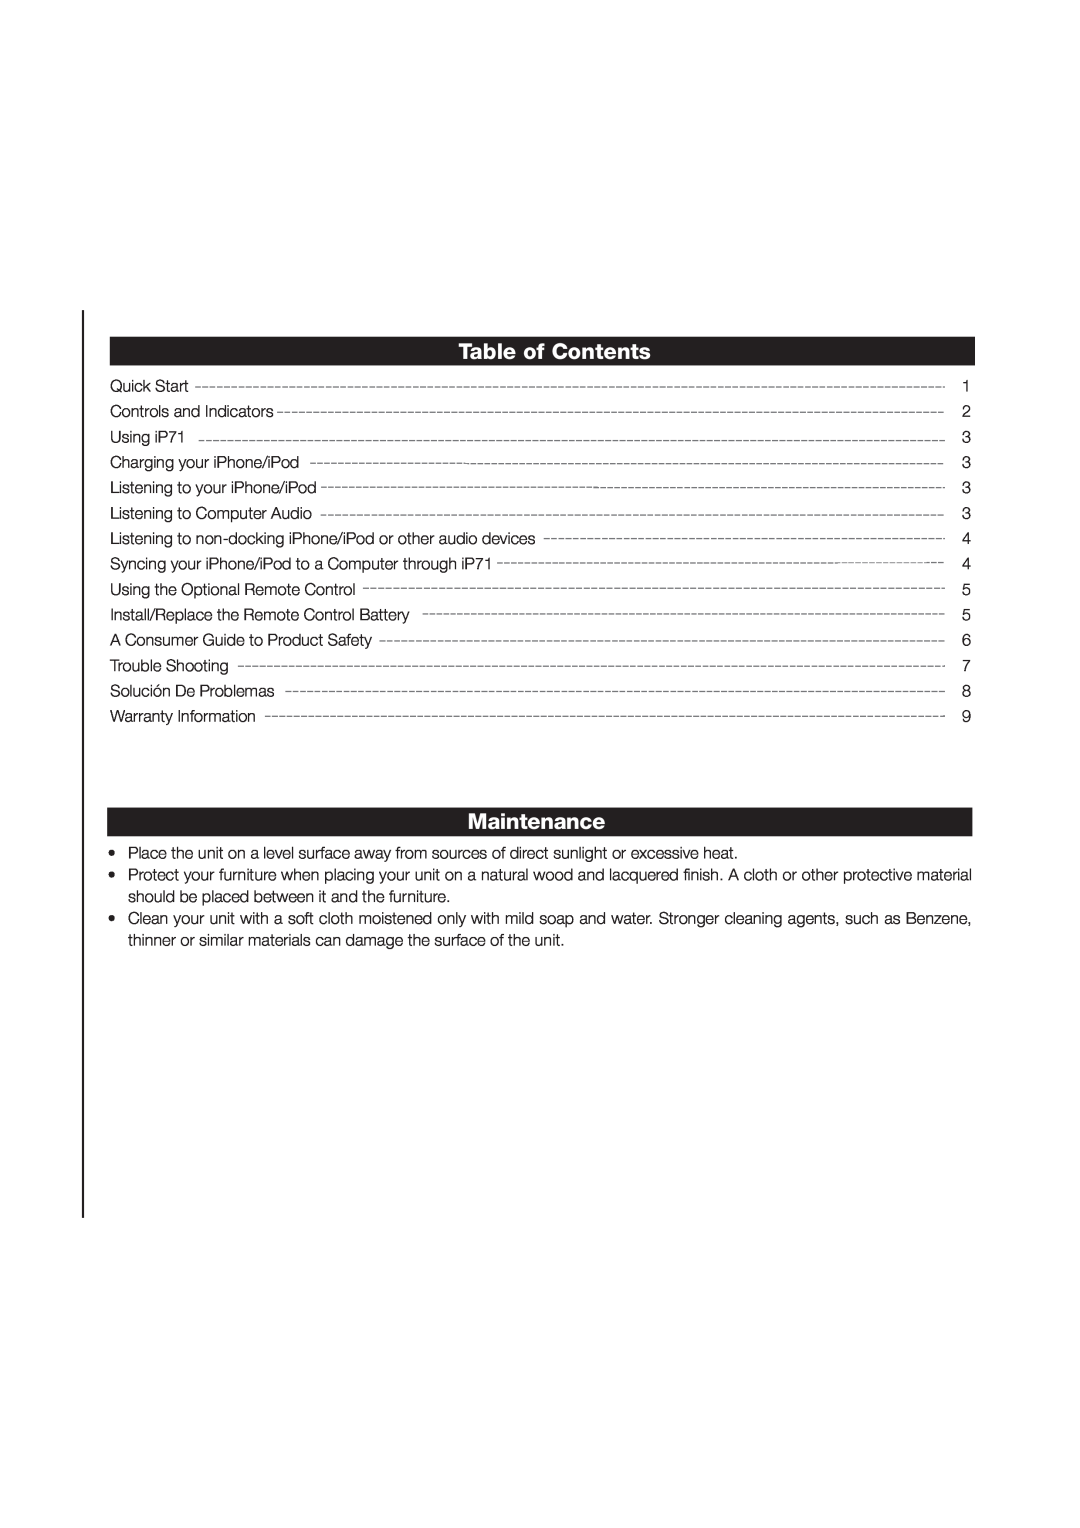 iHome iP71 manual Table of Contents, Maintenance 